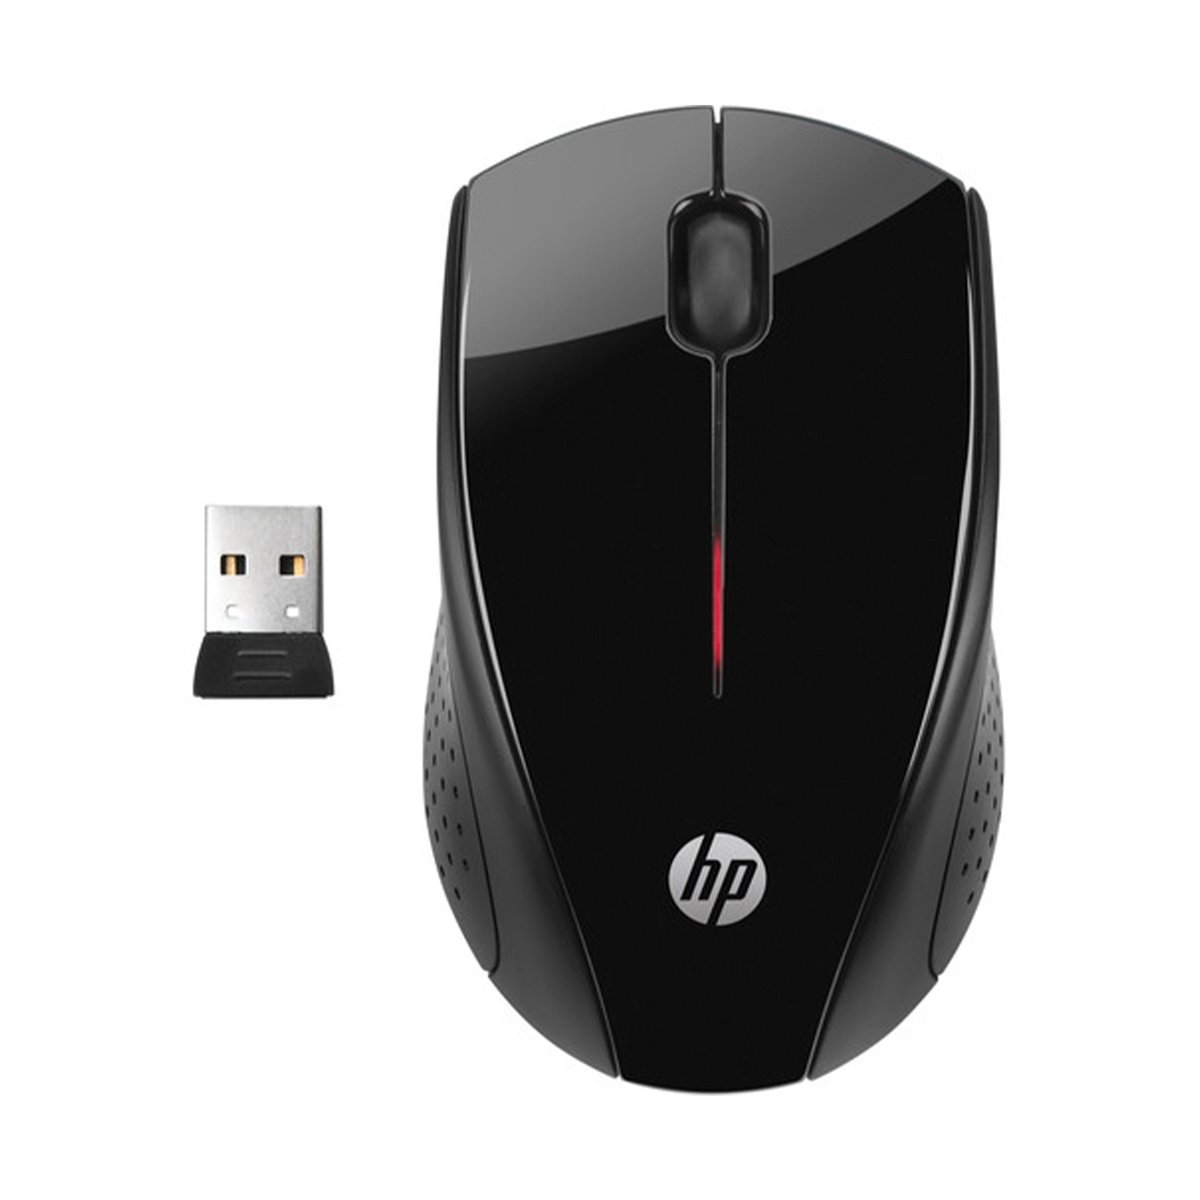 HP X3000 Wireless Mouse (H2C22AA#ABL)